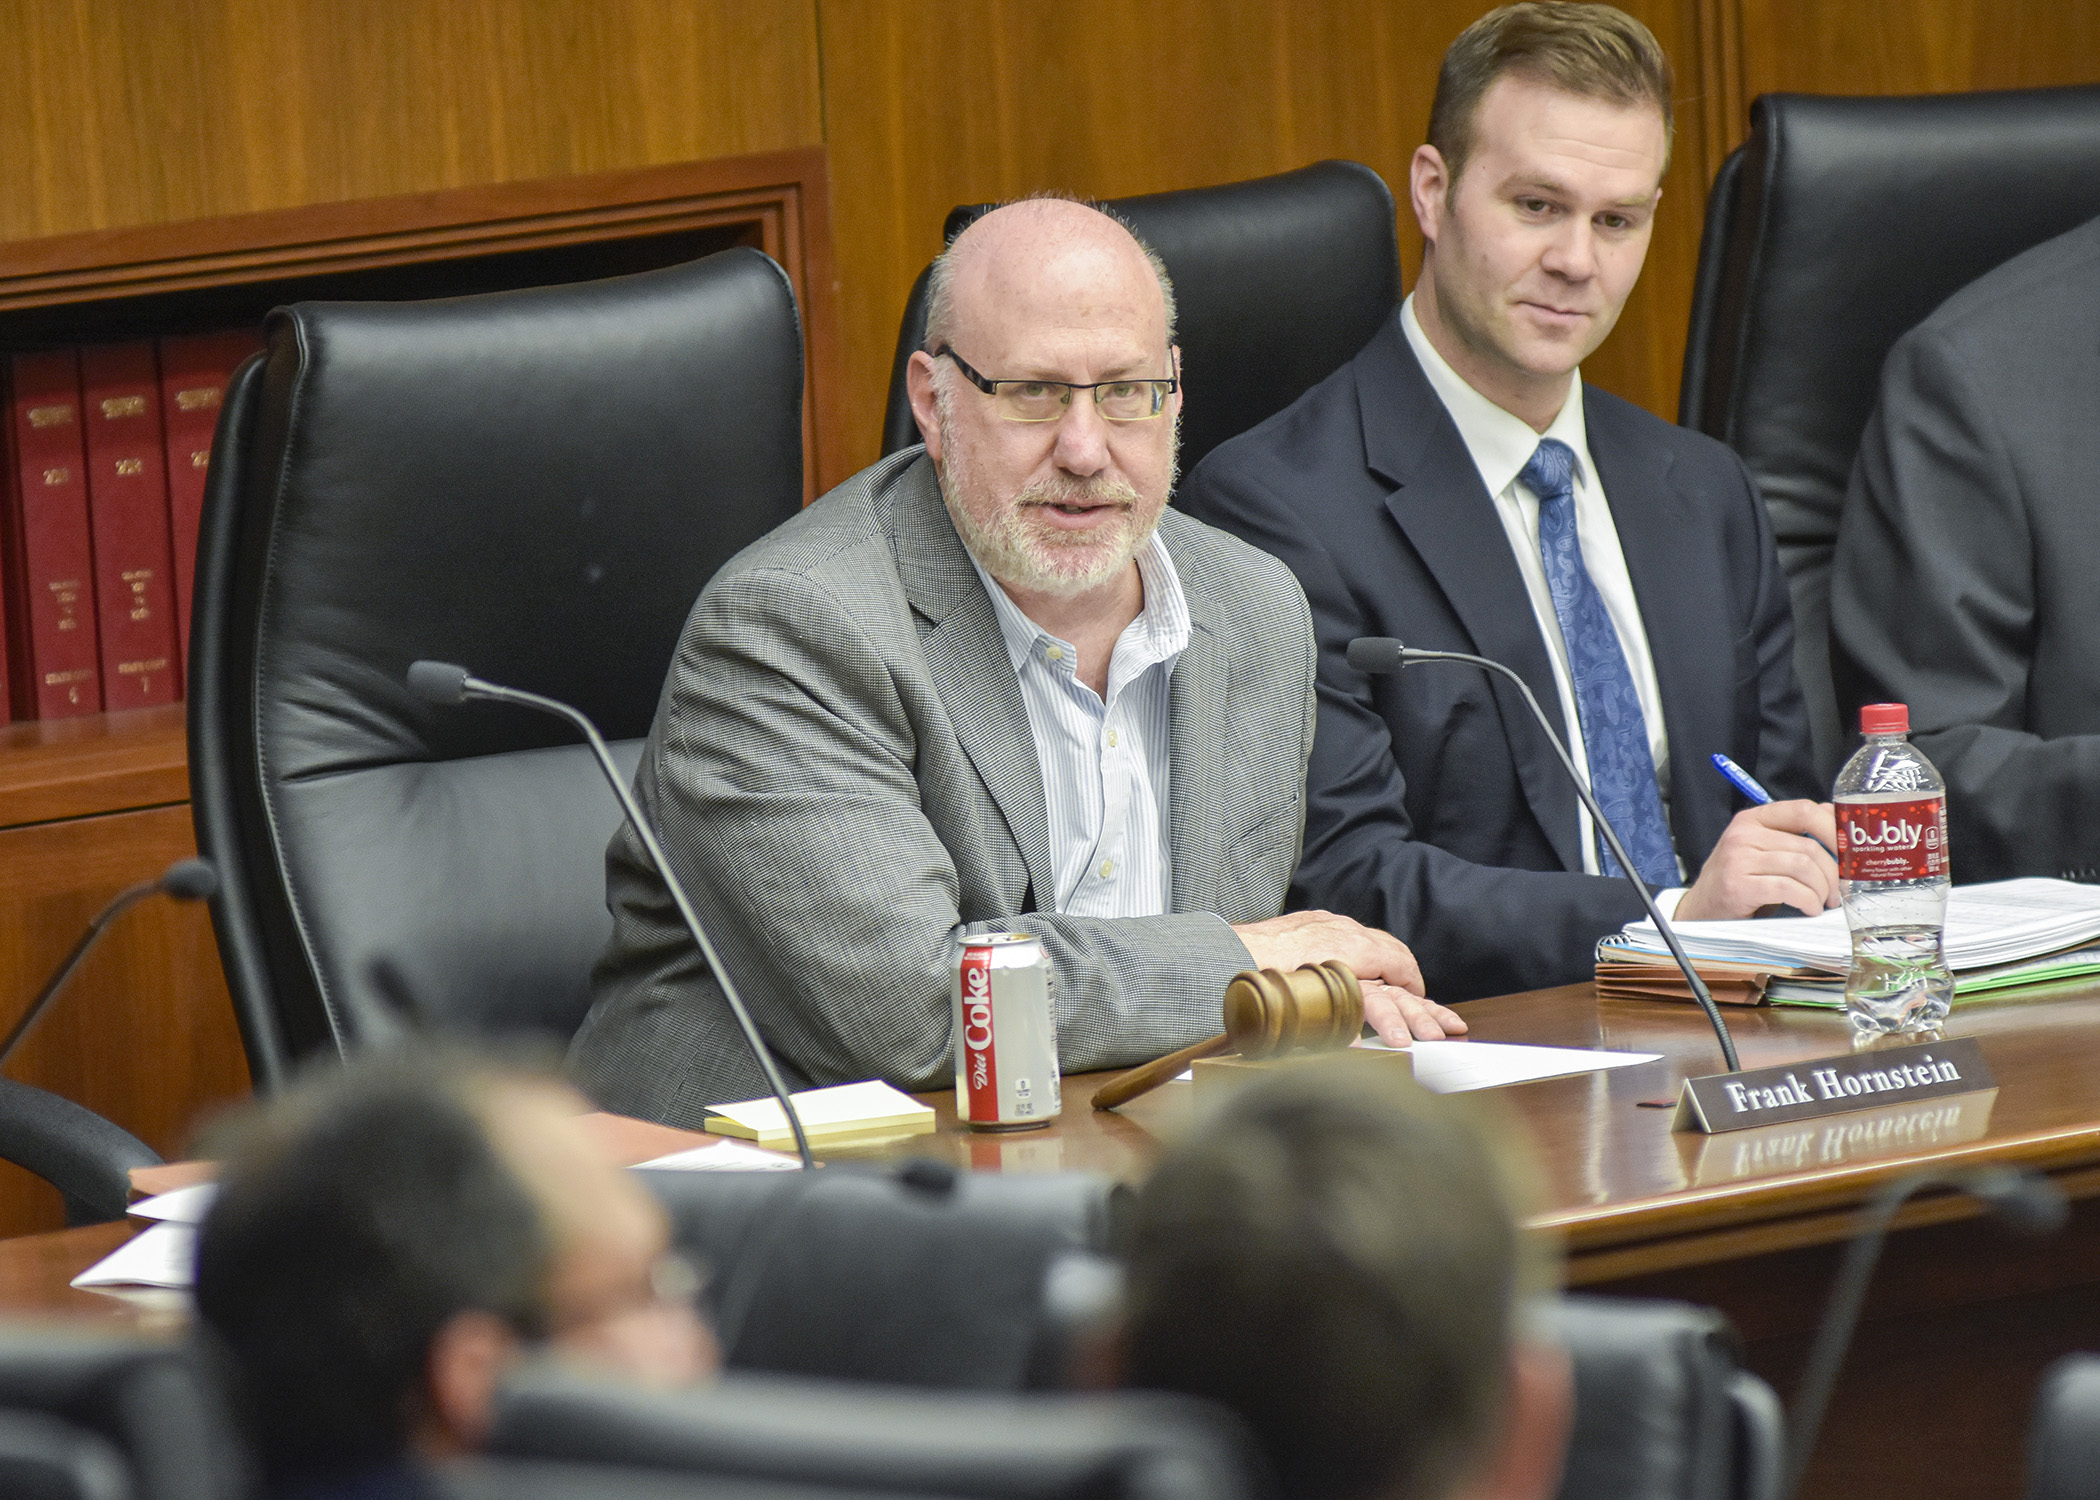 Rep. Frank Hornstein, chair of the House Transportation Finance and Policy Division, comments during a May 22 informational hearing on the omnibus transportation finance bill. Photo by Andrew VonBank